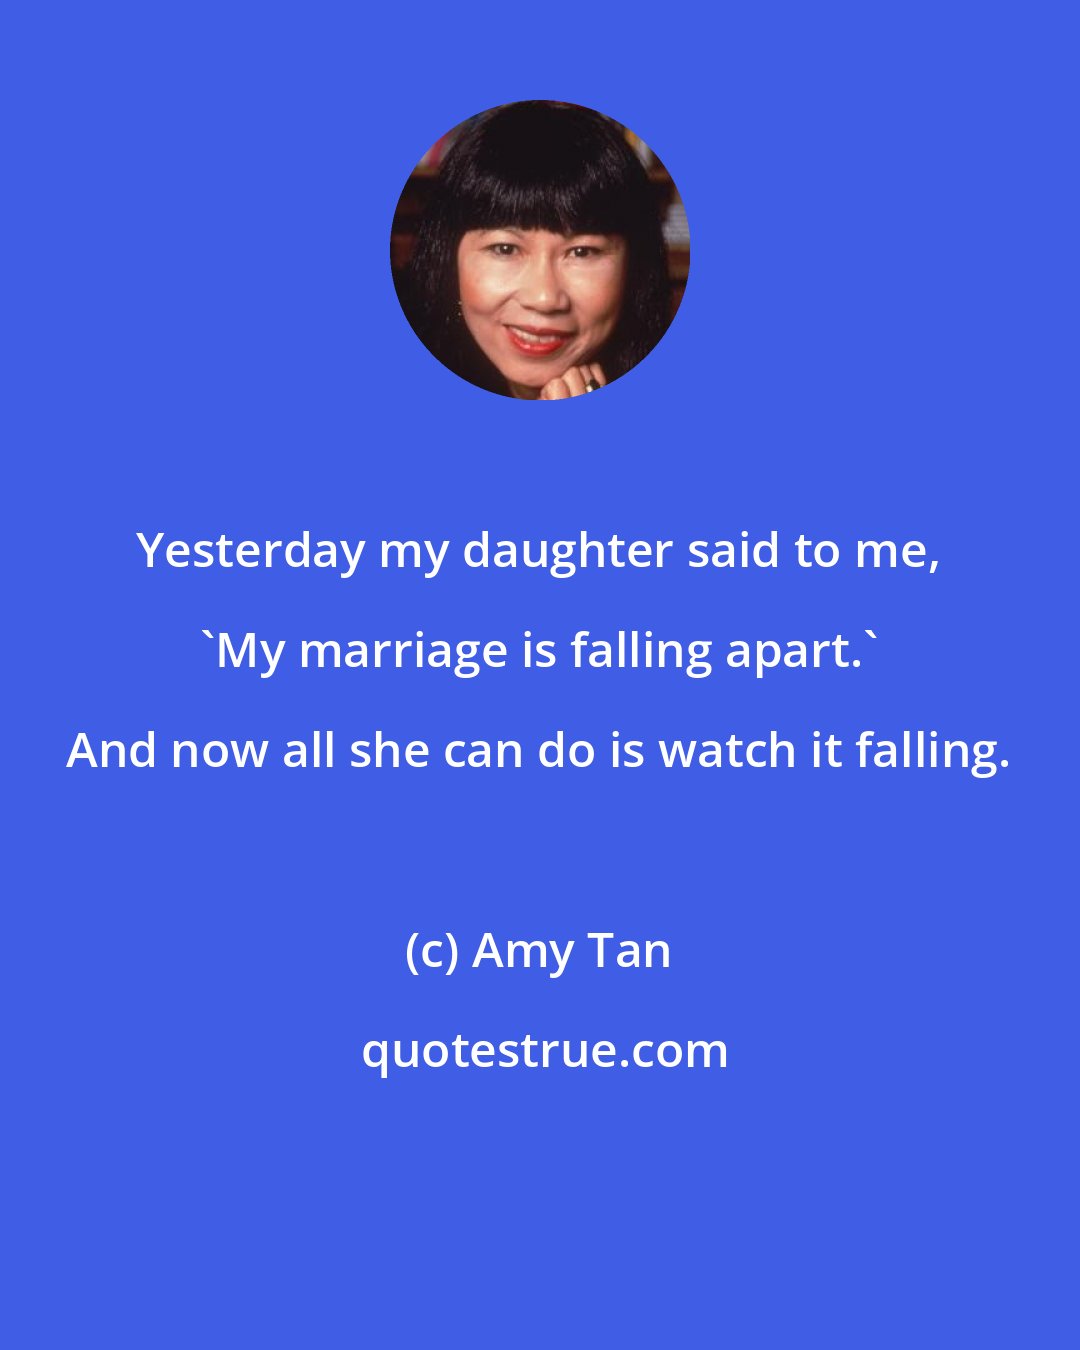 Amy Tan: Yesterday my daughter said to me, 'My marriage is falling apart.' And now all she can do is watch it falling.